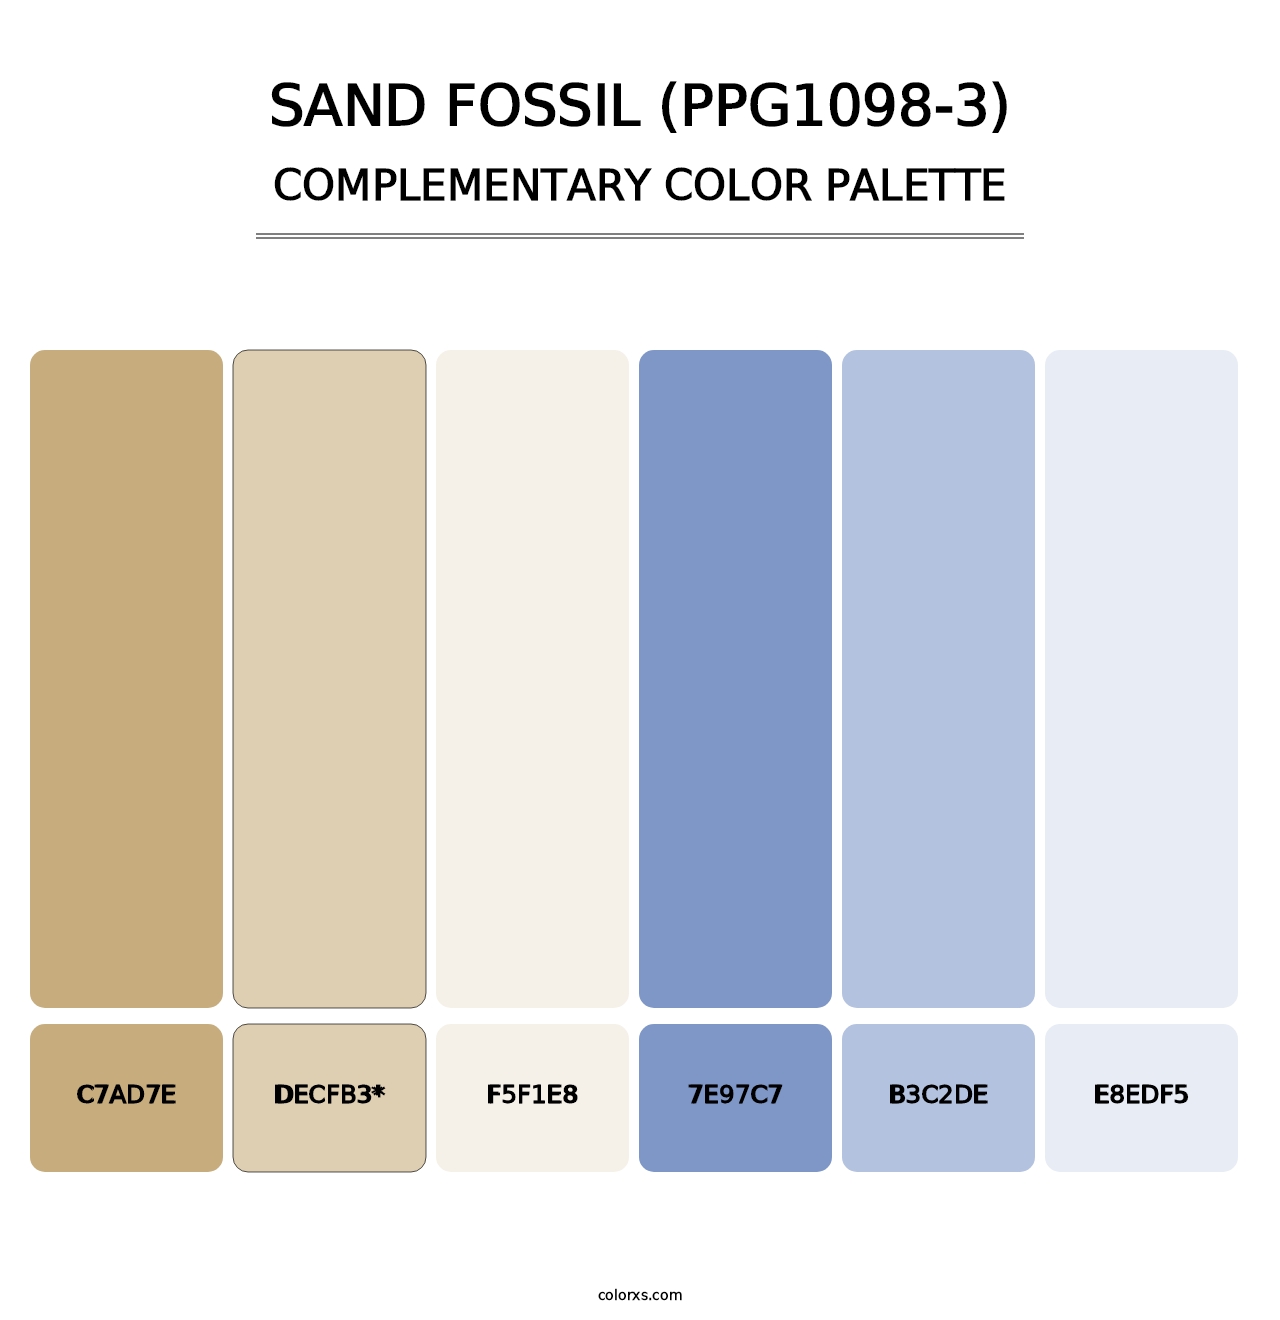 Sand Fossil (PPG1098-3) - Complementary Color Palette